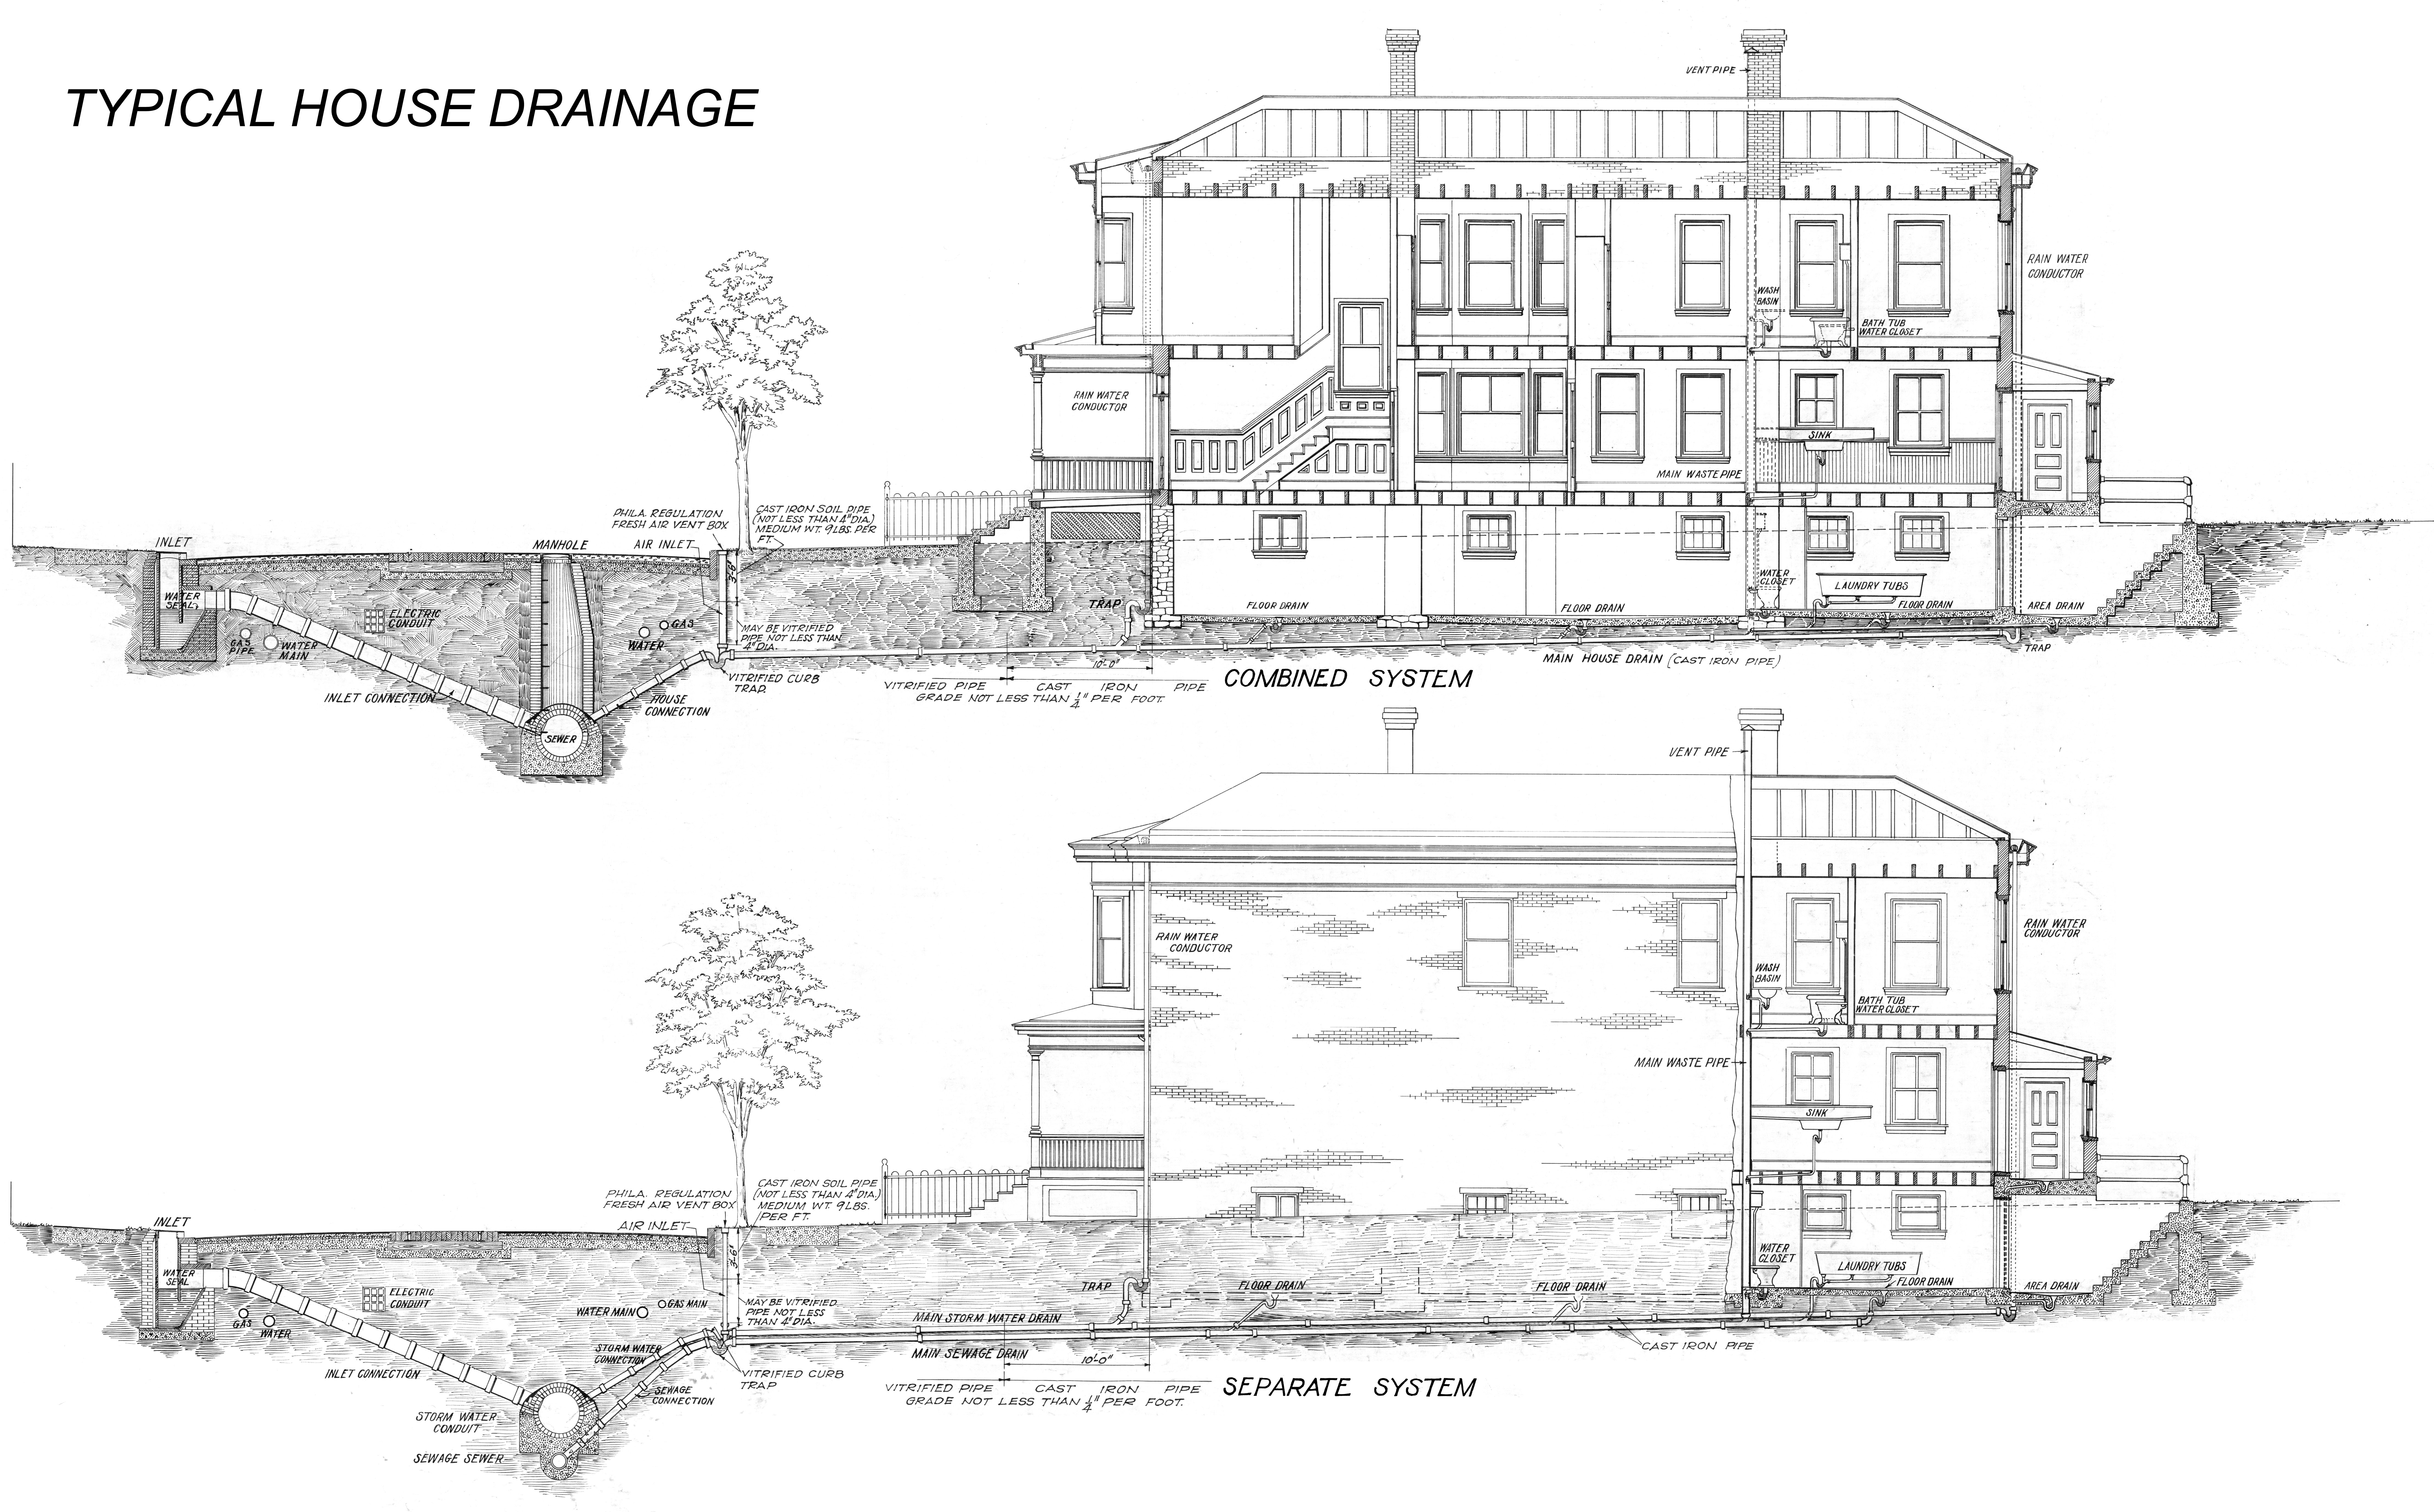 Typical House Drainage, Combined and Separate Systems (2008.001.0032)